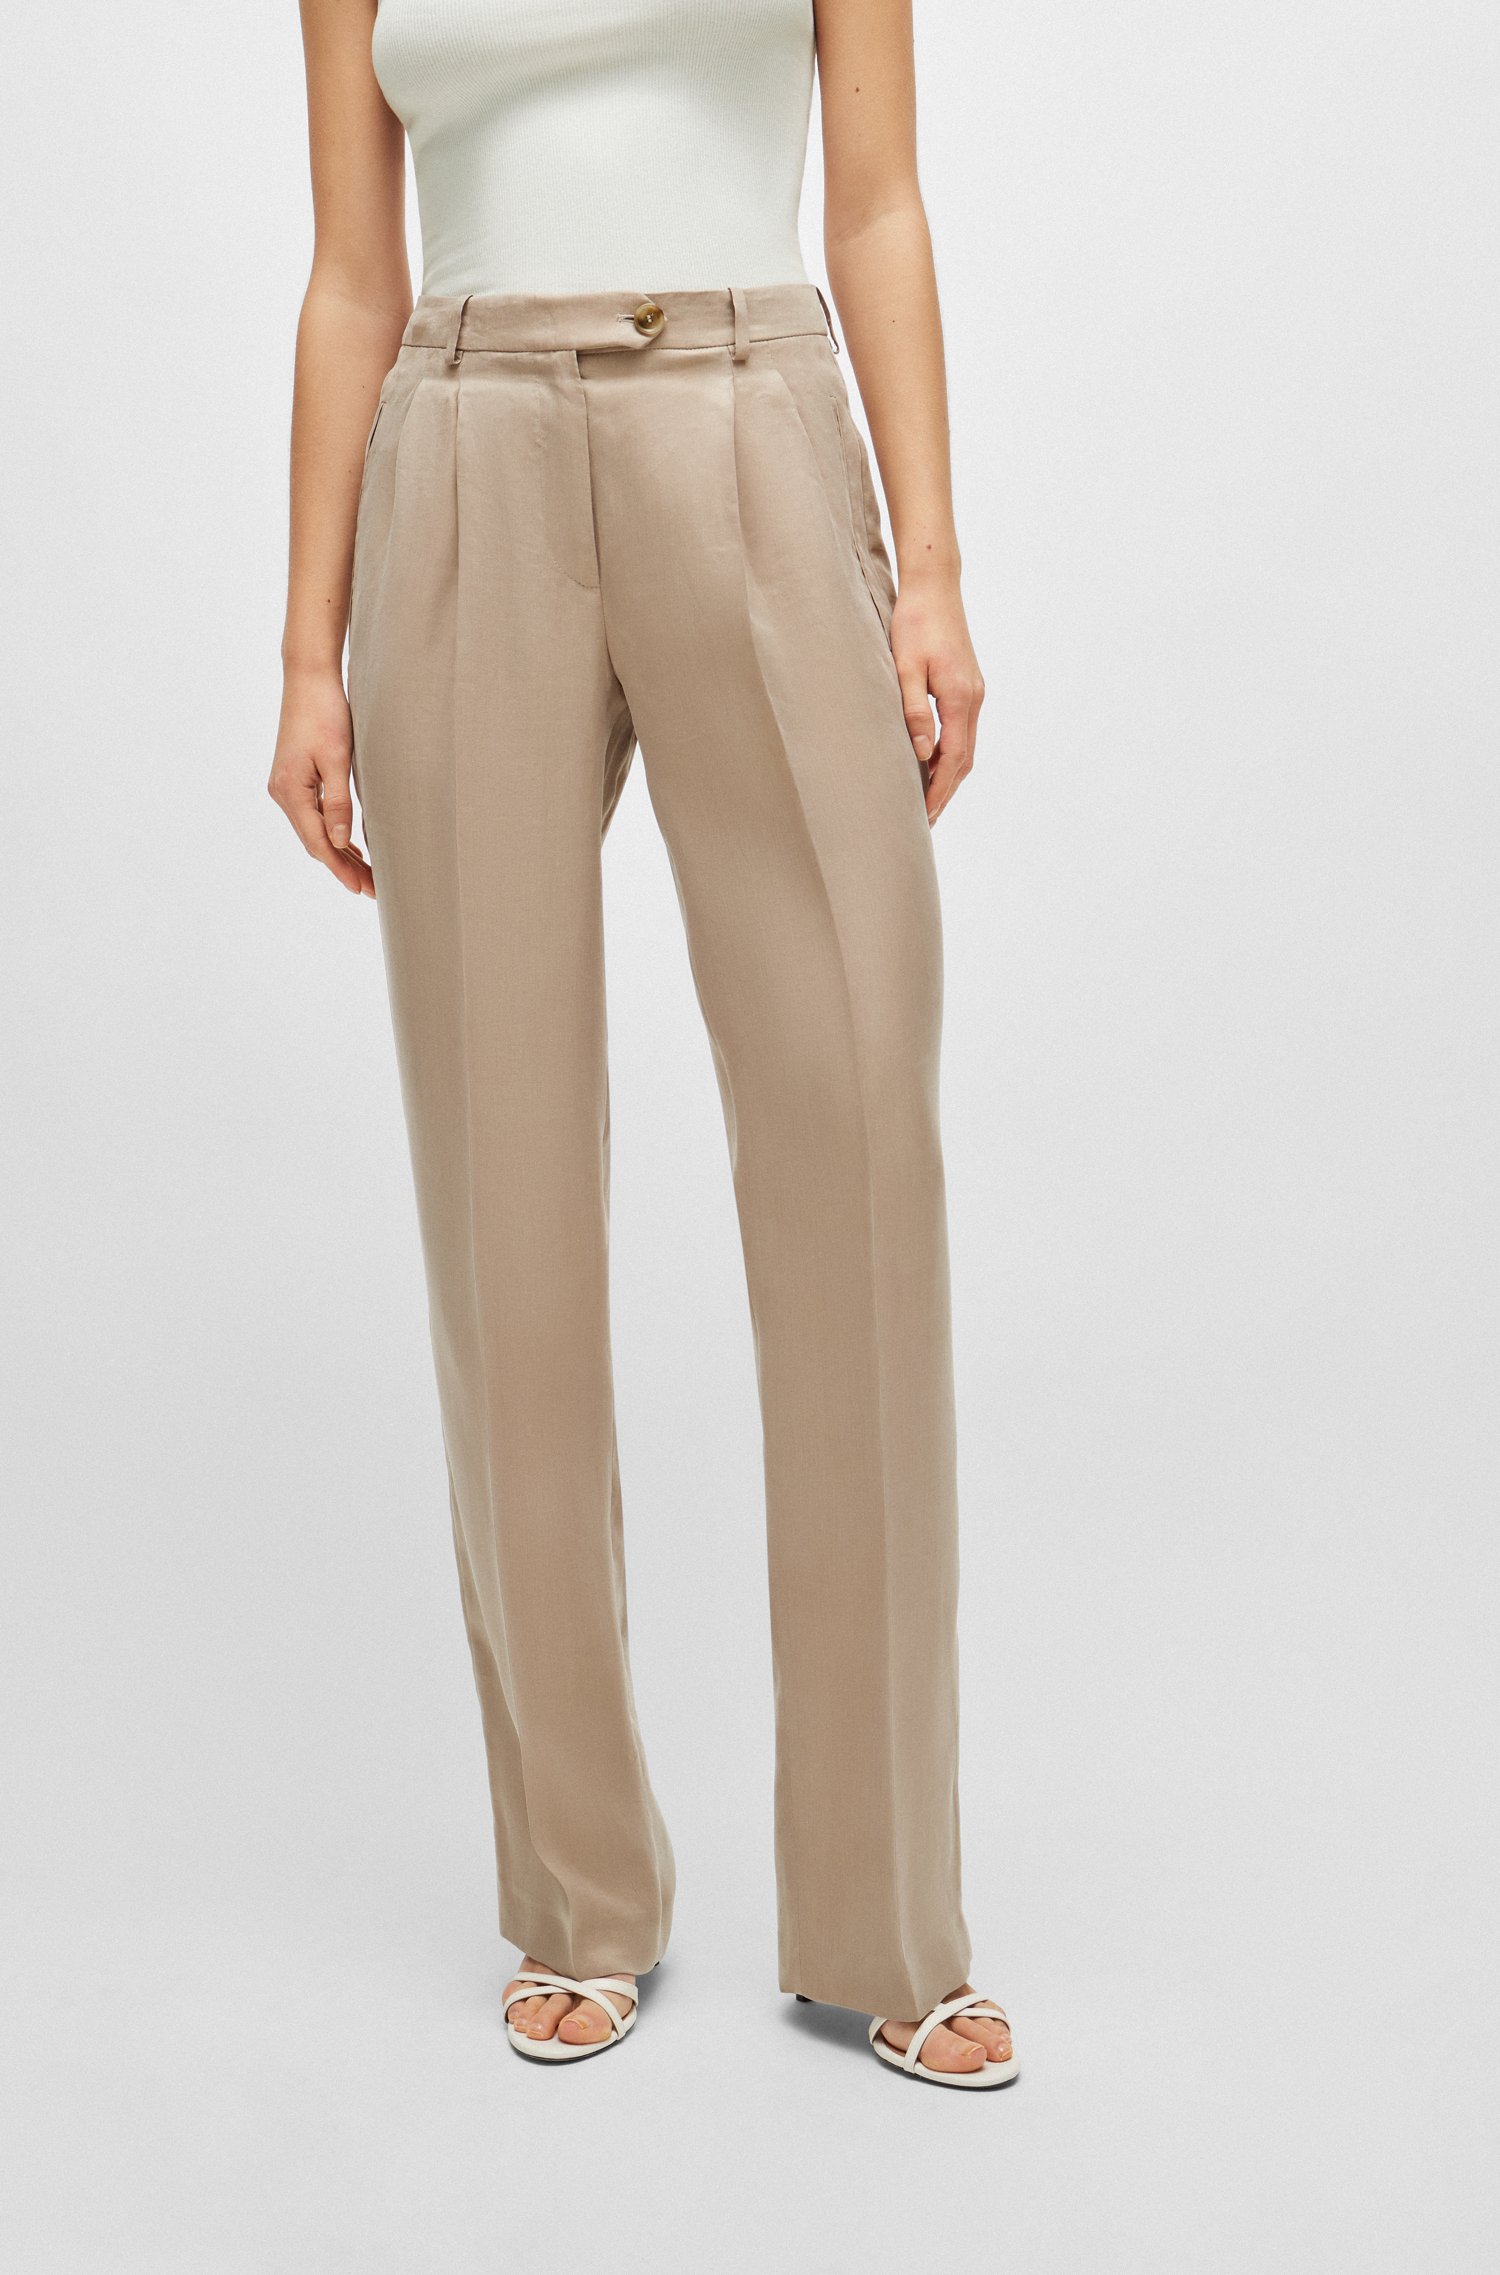 High-waisted trousers with a wide leg